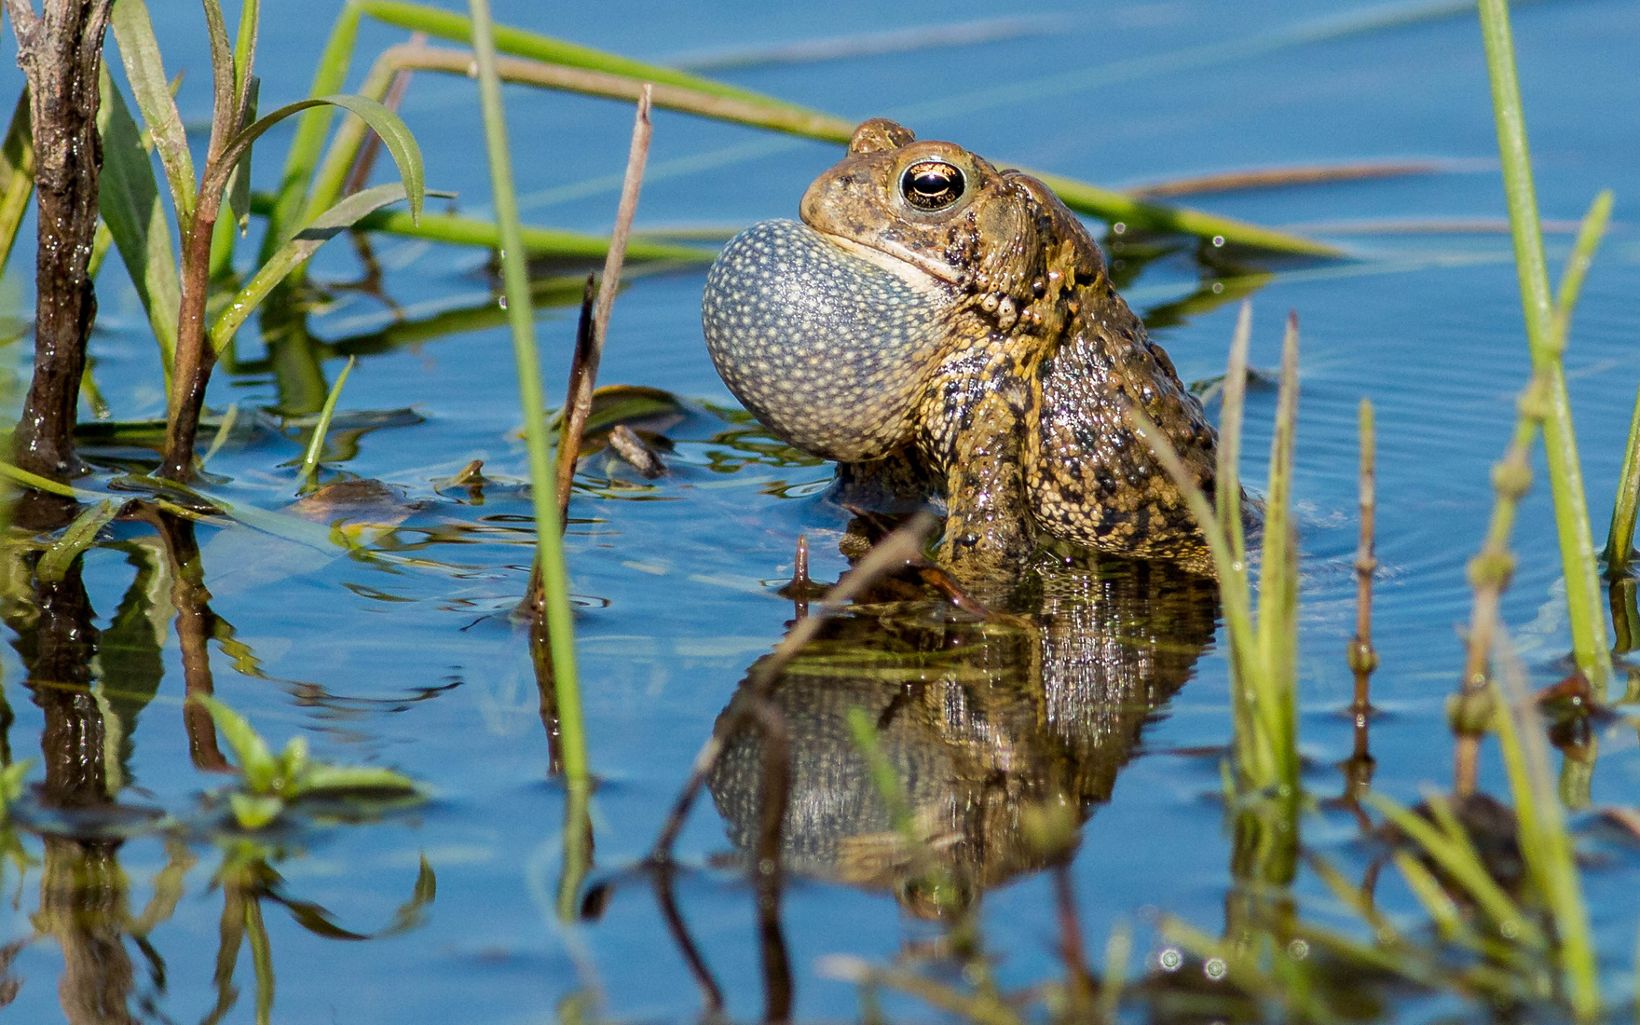 Wisconsin’s only toad, the American toad can live in wet and dry habitats including our yards and gardens!